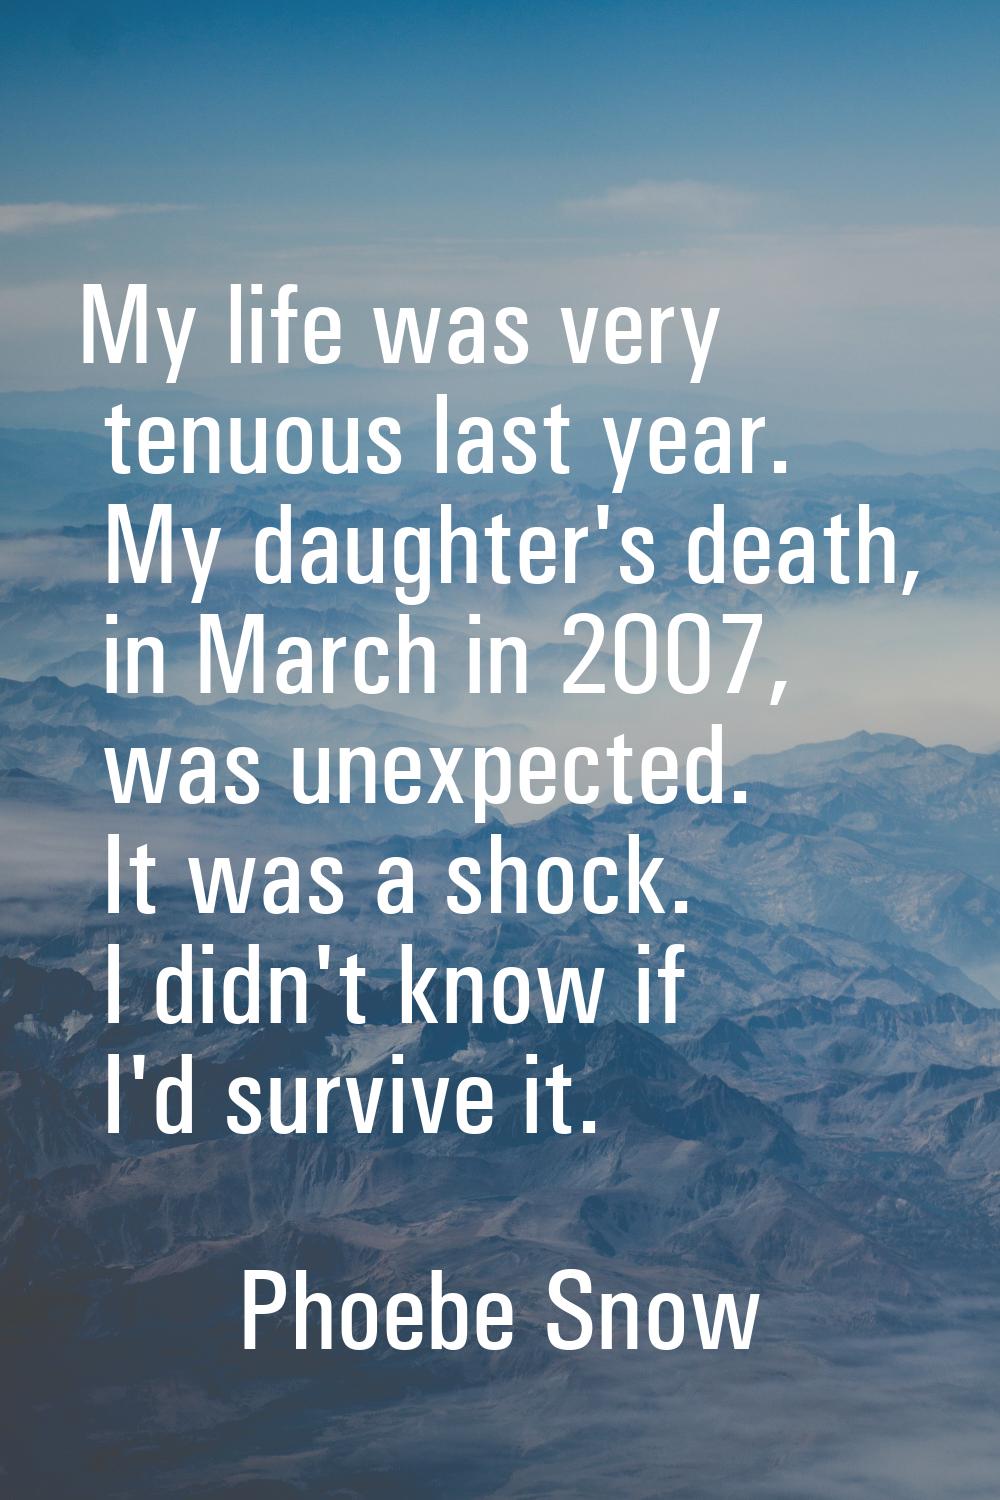 My life was very tenuous last year. My daughter's death, in March in 2007, was unexpected. It was a